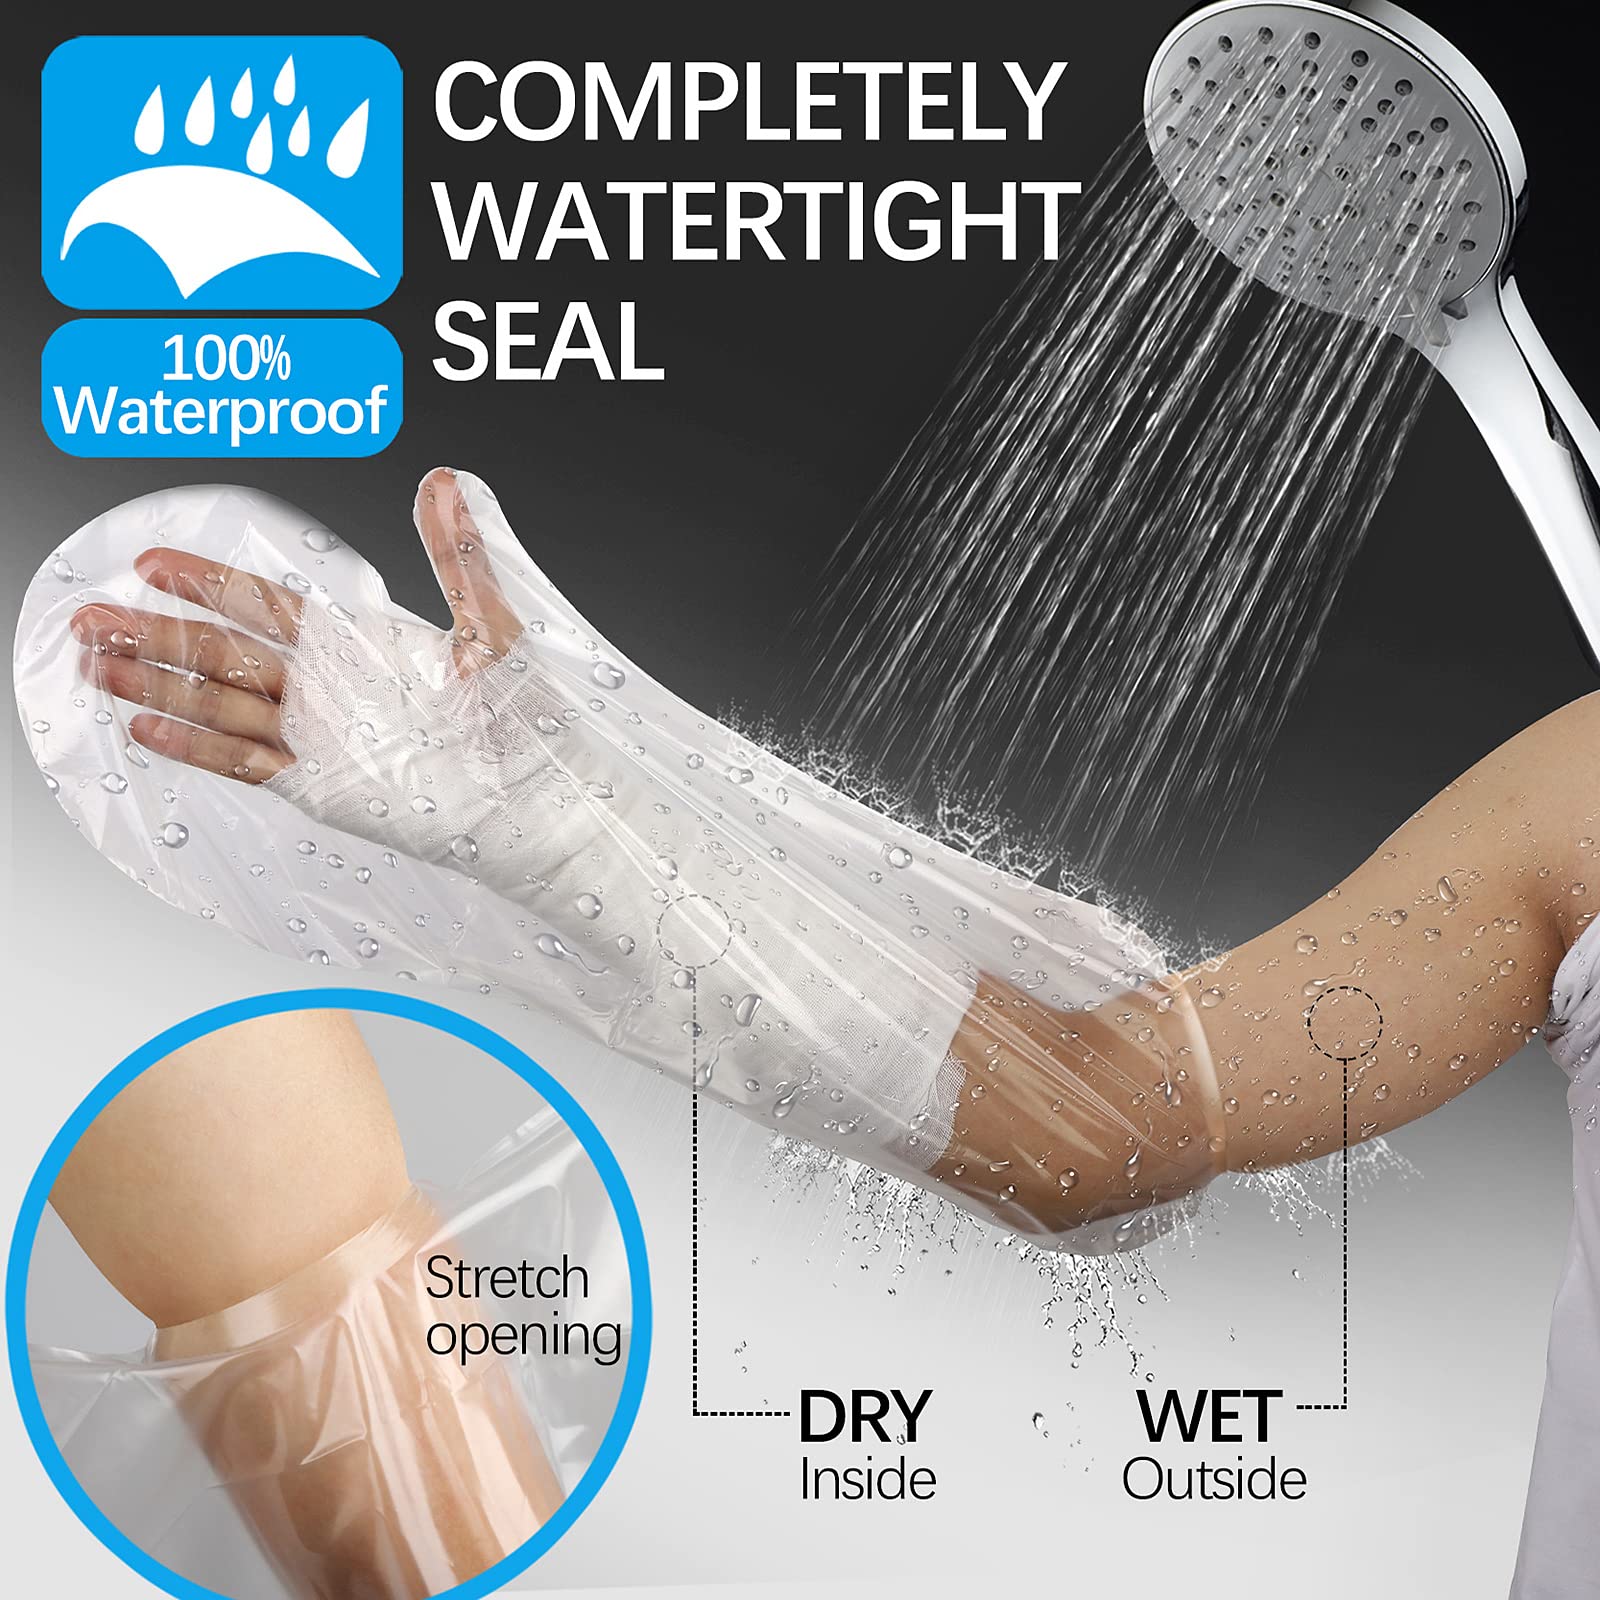 Naiiling Waterproof Cast Cover Arm, Cast Covers for Shower Arm, Adult Watertight Seal Cast Protector Cast Sleeve for Broken Surgery Wound Arm Elbow Hand Wrist - 2Pack